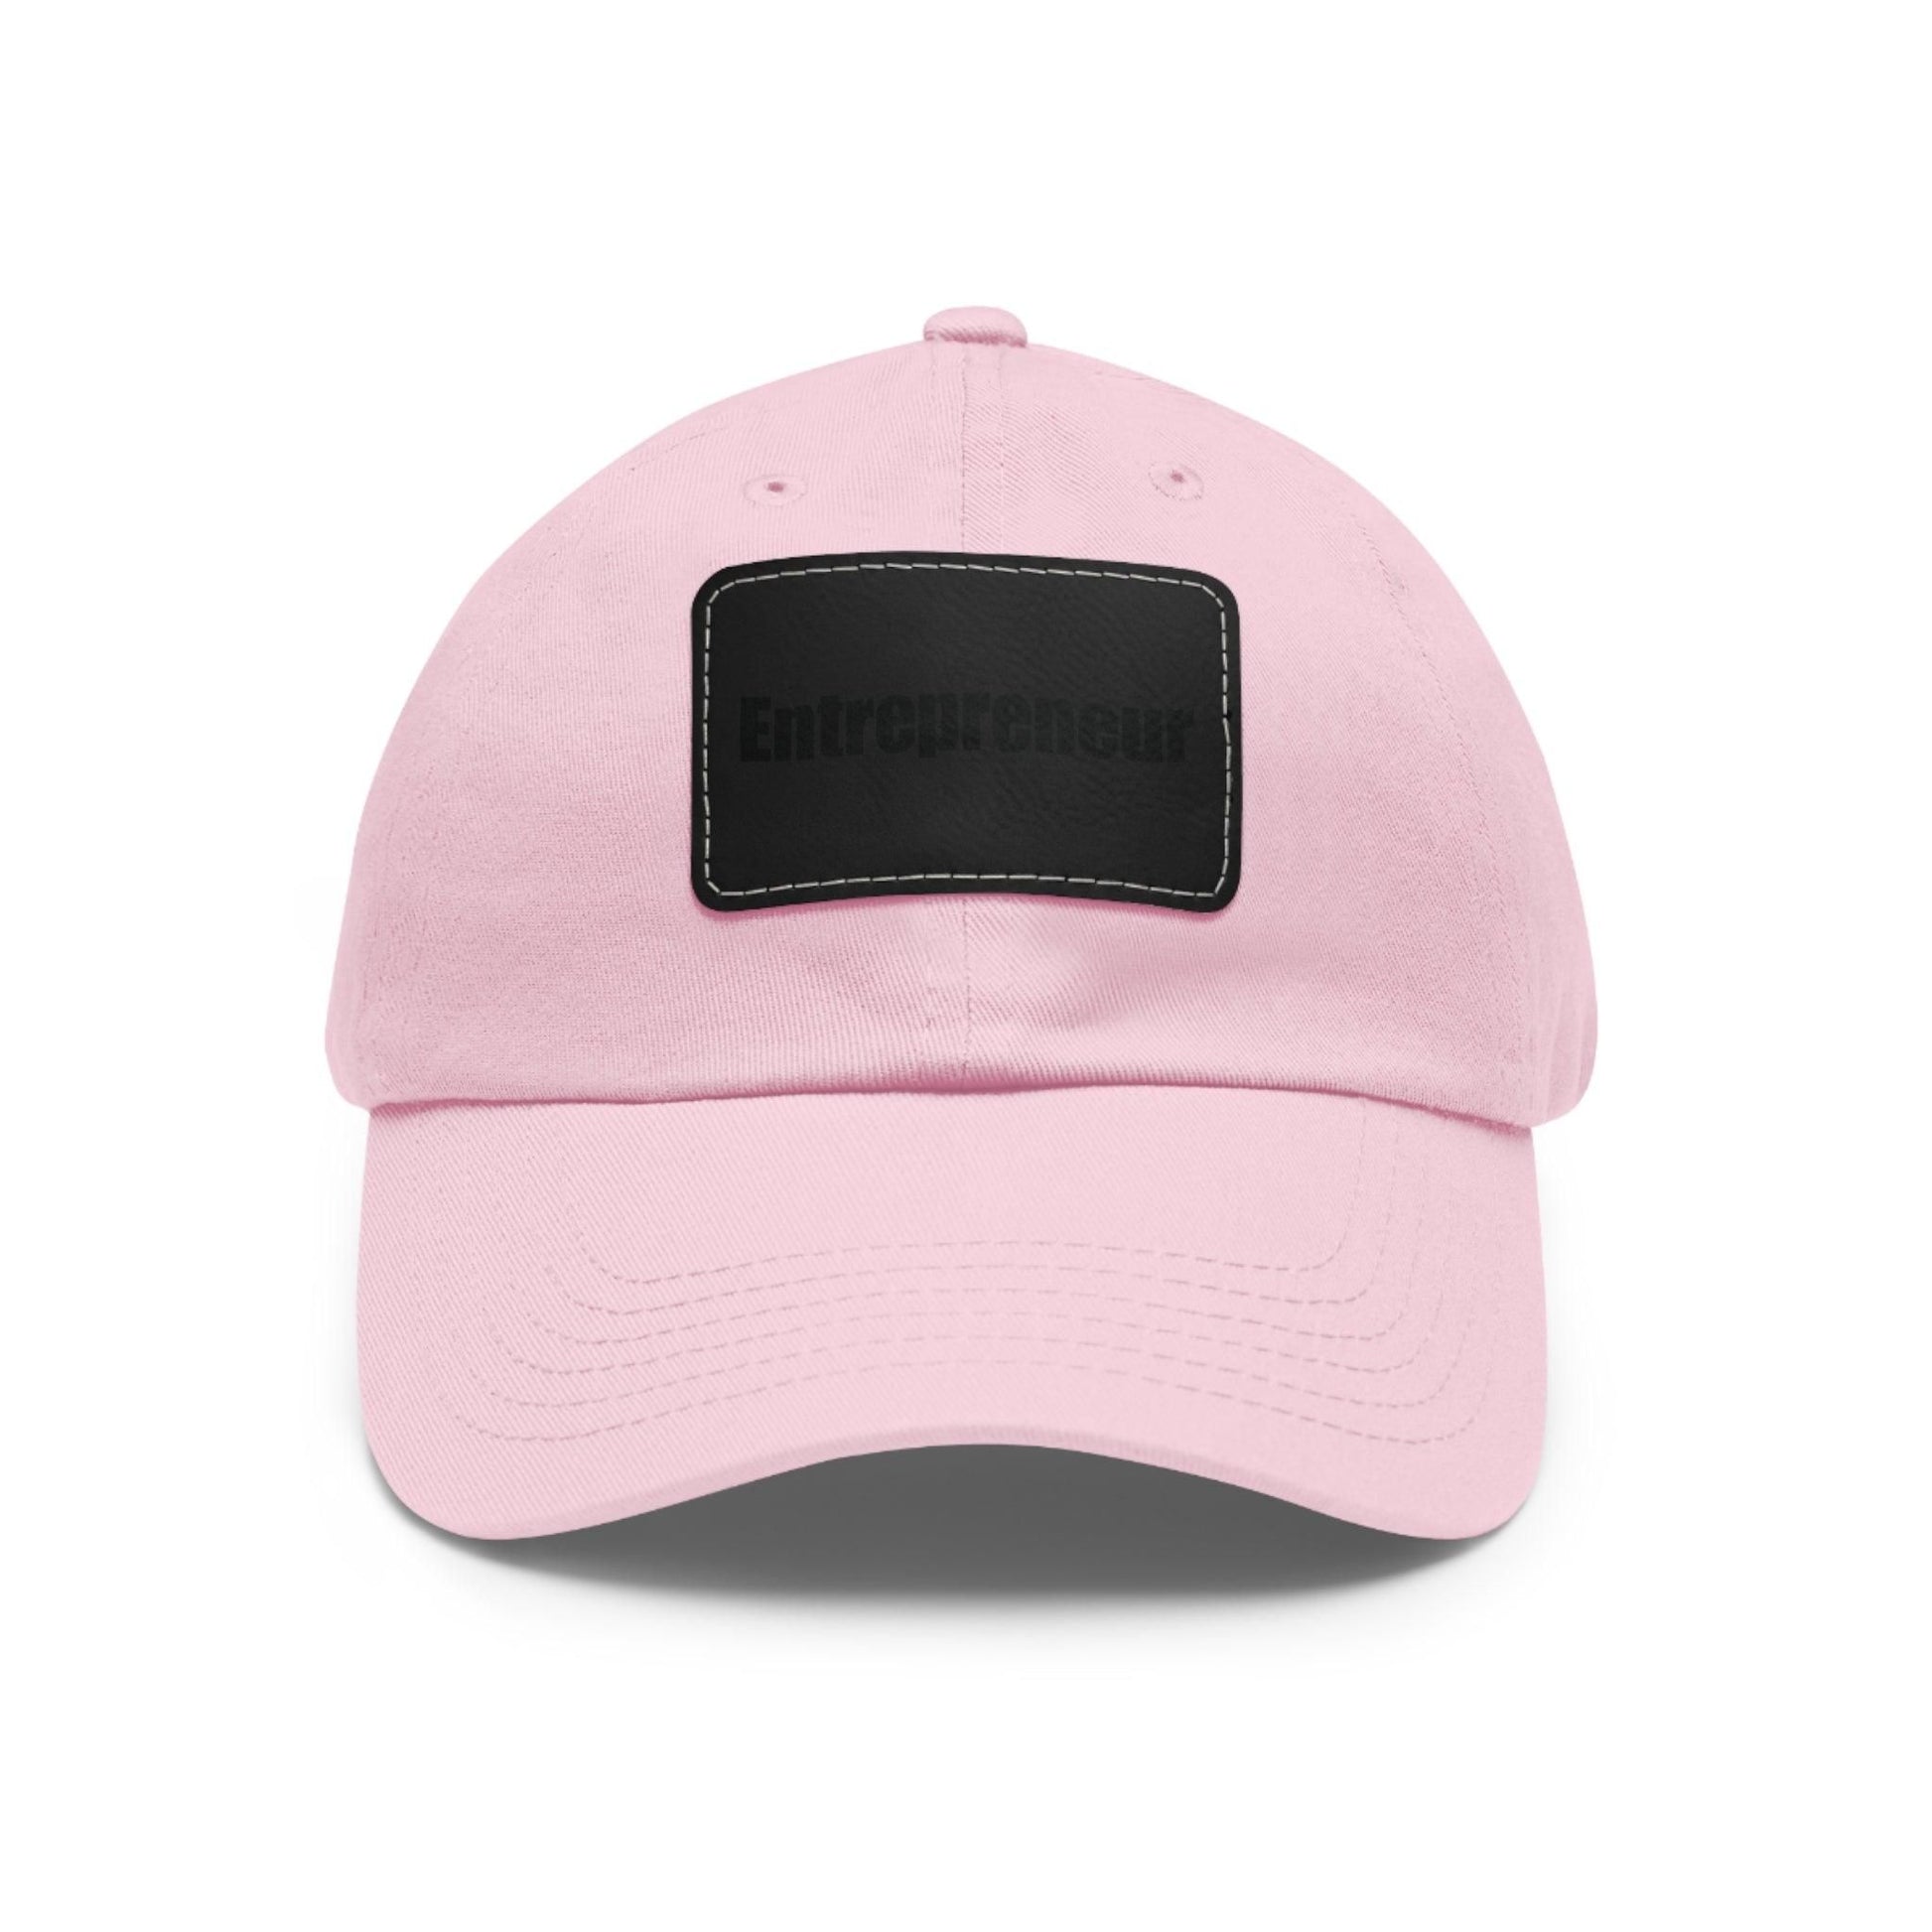 Entrepreneur Baseball Hat with Leather Patch Cap Light Pink / Black patch Rectangle One size